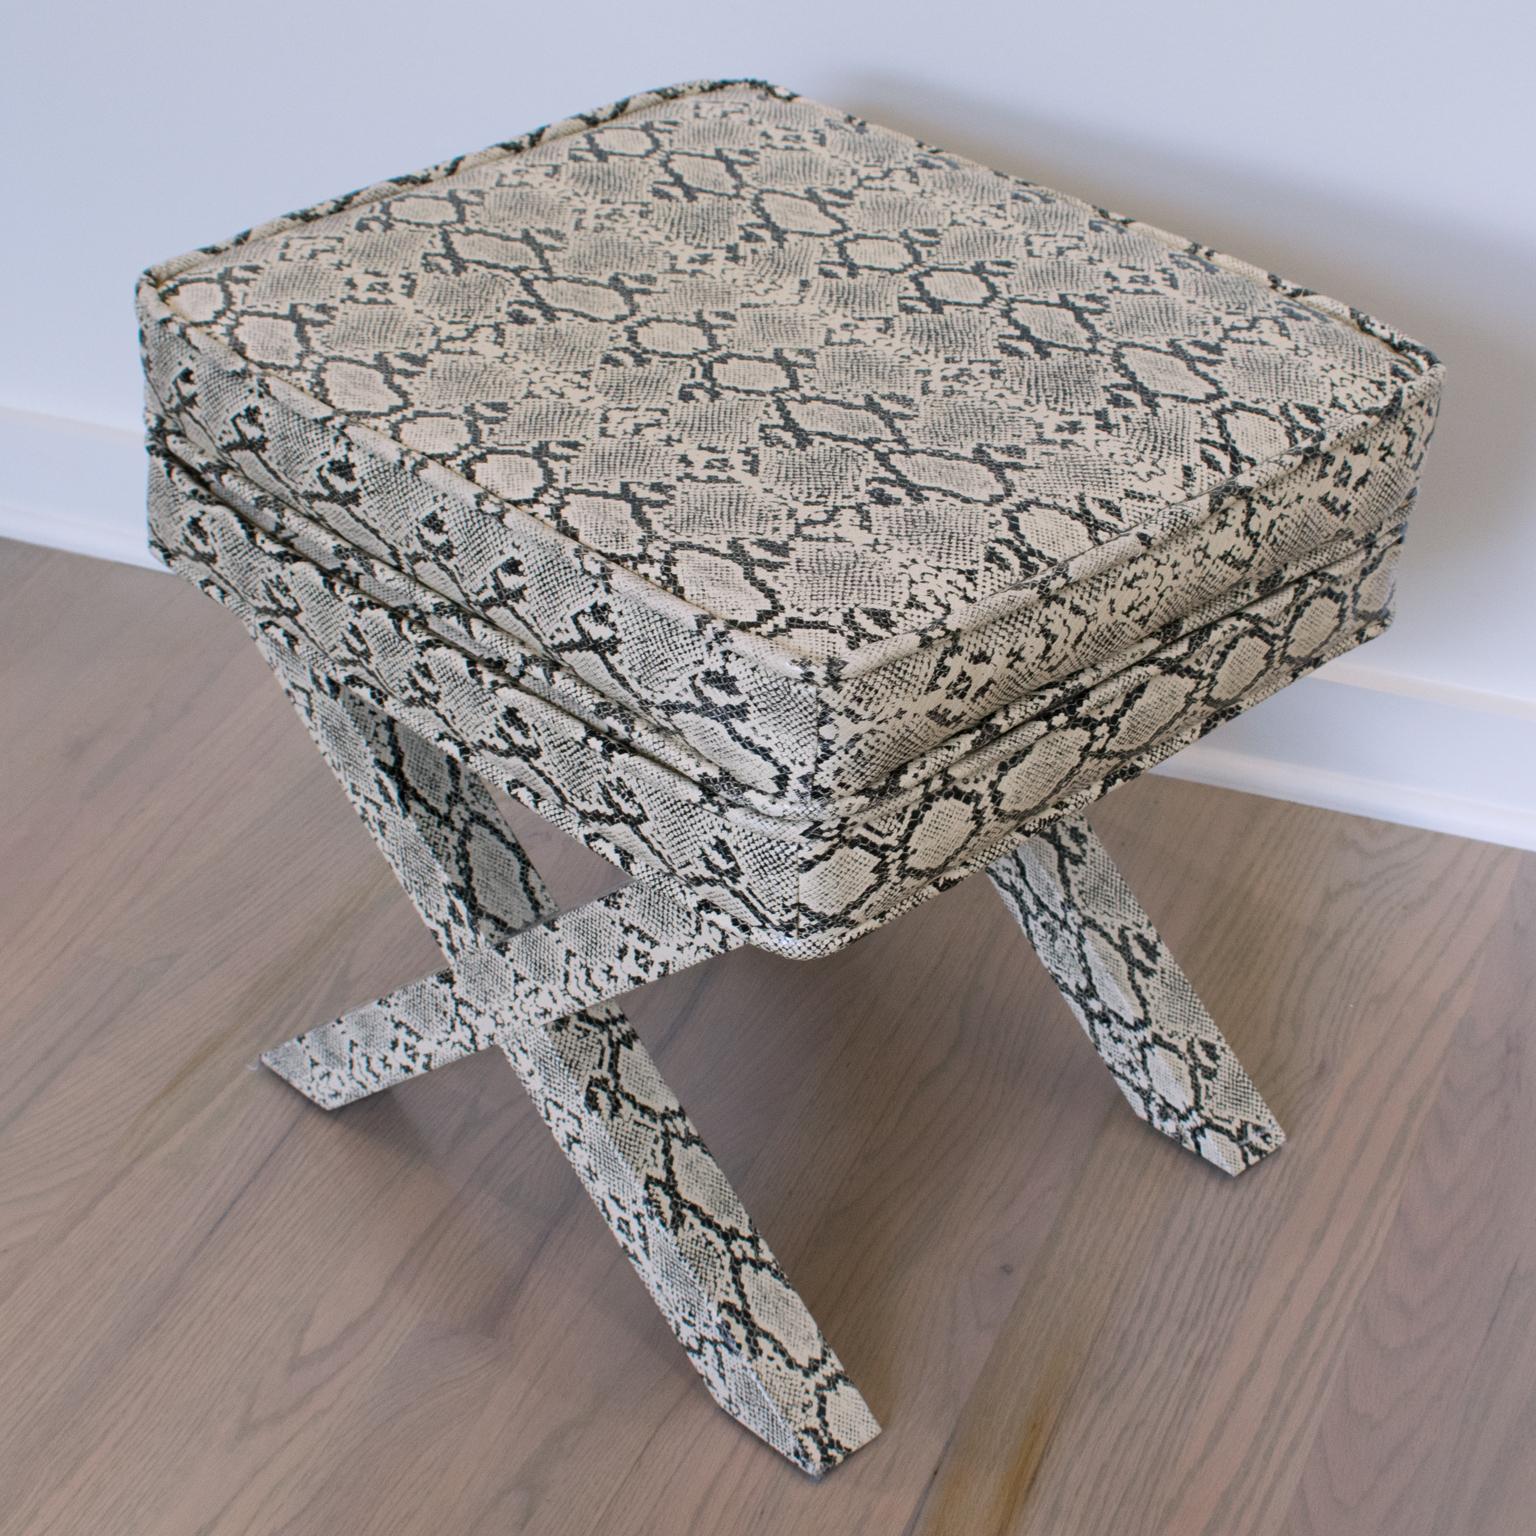 Elegant bench, ottoman, footstool in faux python skin in the manner of the fully upholstered designs by Billy Baldwin and Karl Springer. Sleek and urbane design with Classic 